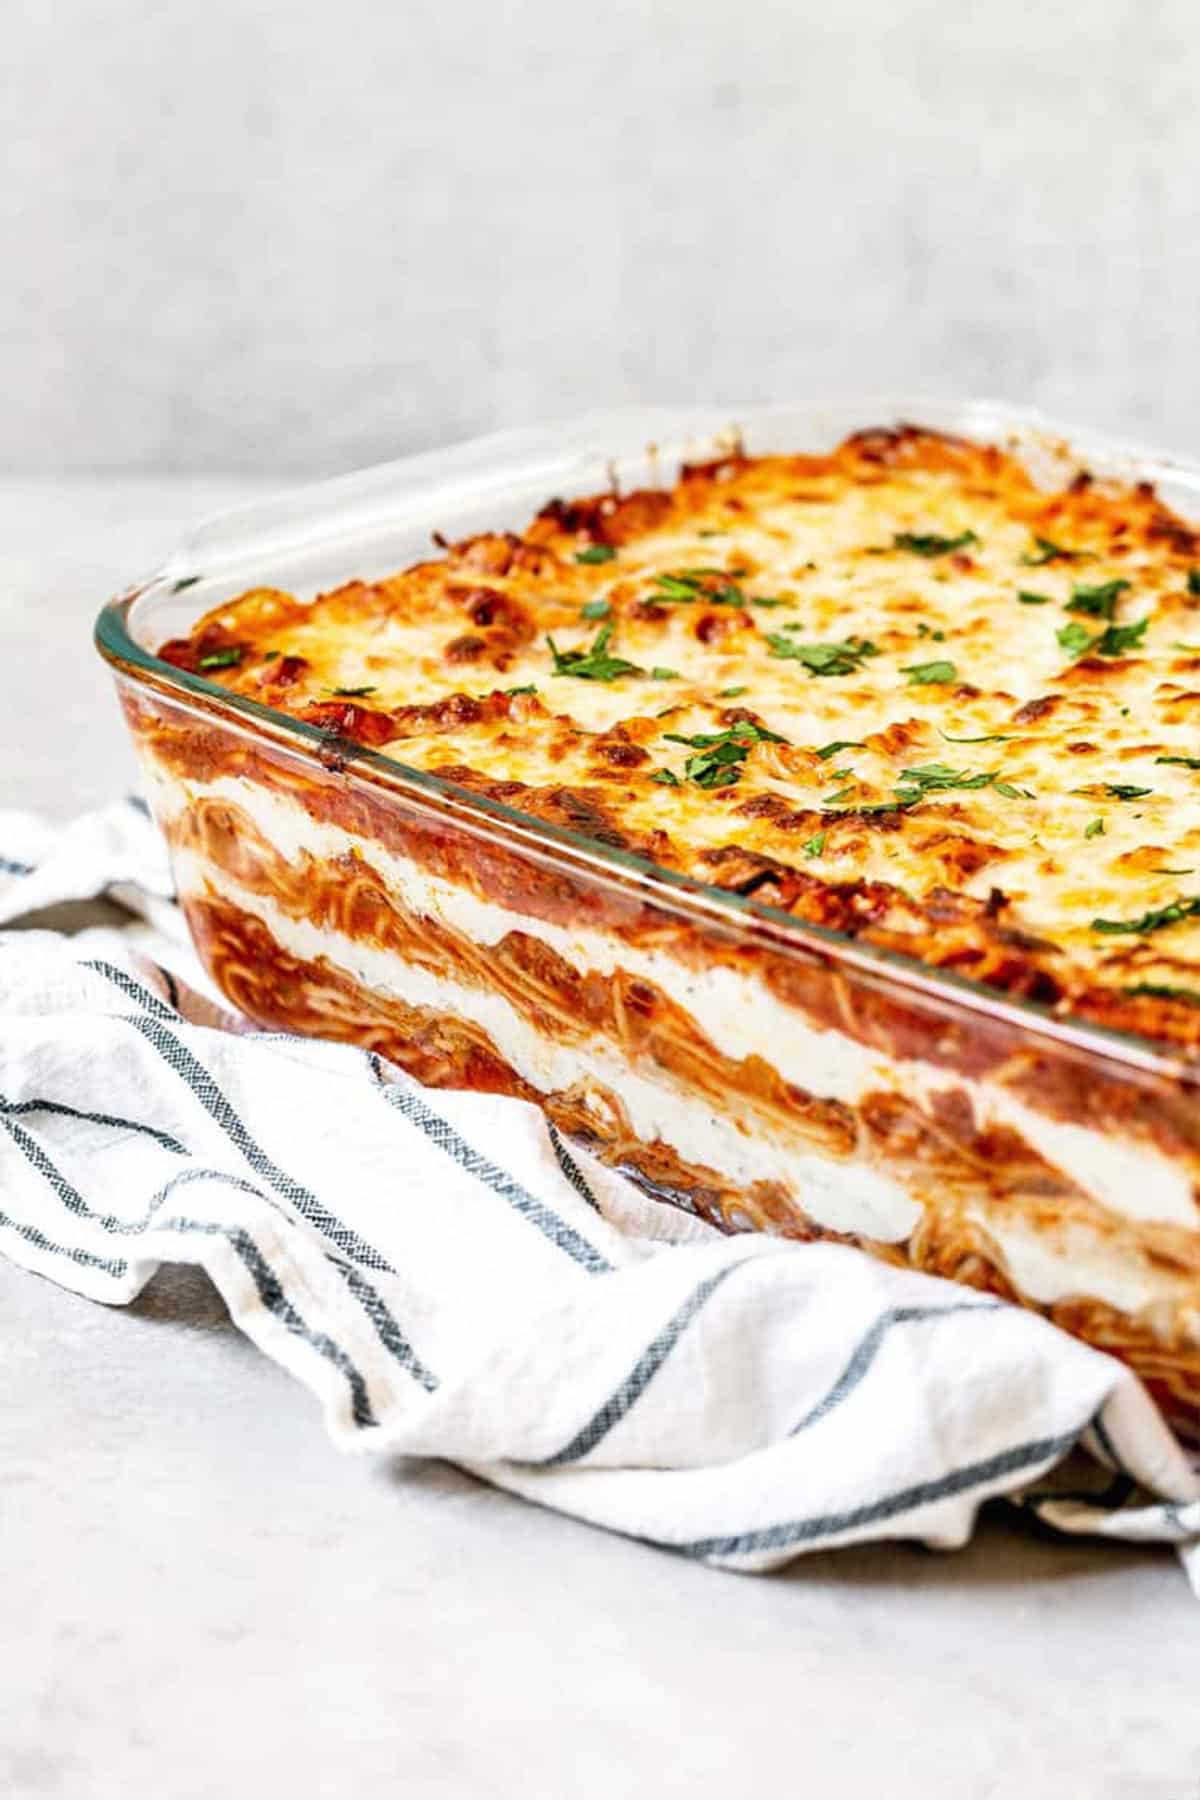 A large Pyrex tray of baked pasta dish with bubbly cheese